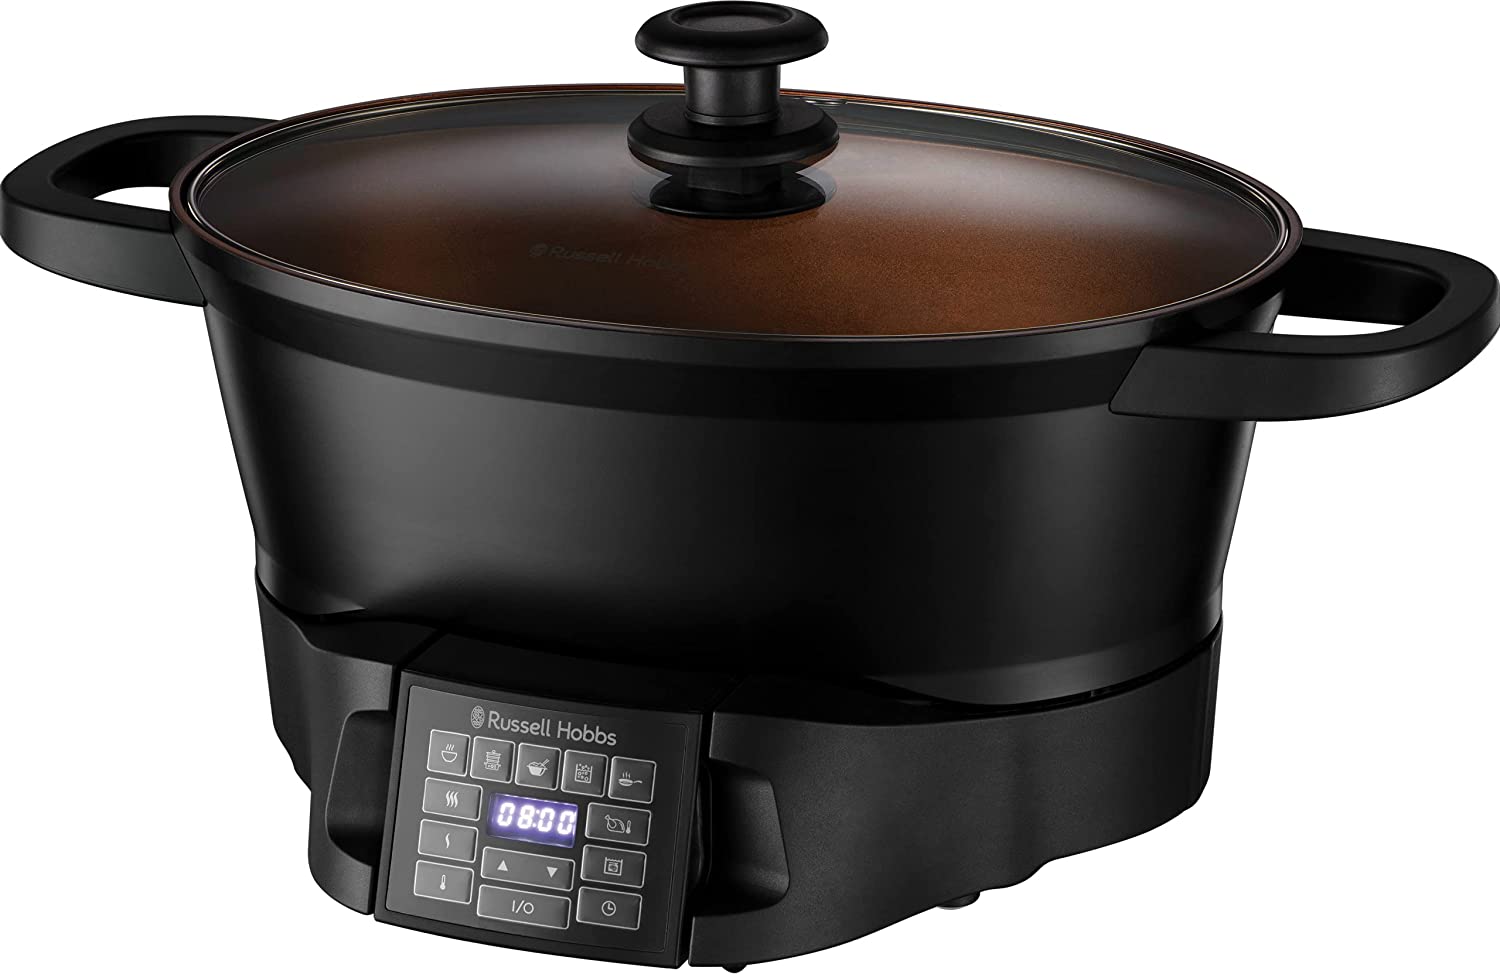 Russell Hobbs Multi-Cooker 6.5 L [Digital Display] 8 Cooking Functions (Slow Cooker, Steamer, Rice Cooker, Roaster, Sous Vide Cooker, Cooker, Warming Container) Dishwasher Safe 28270-56